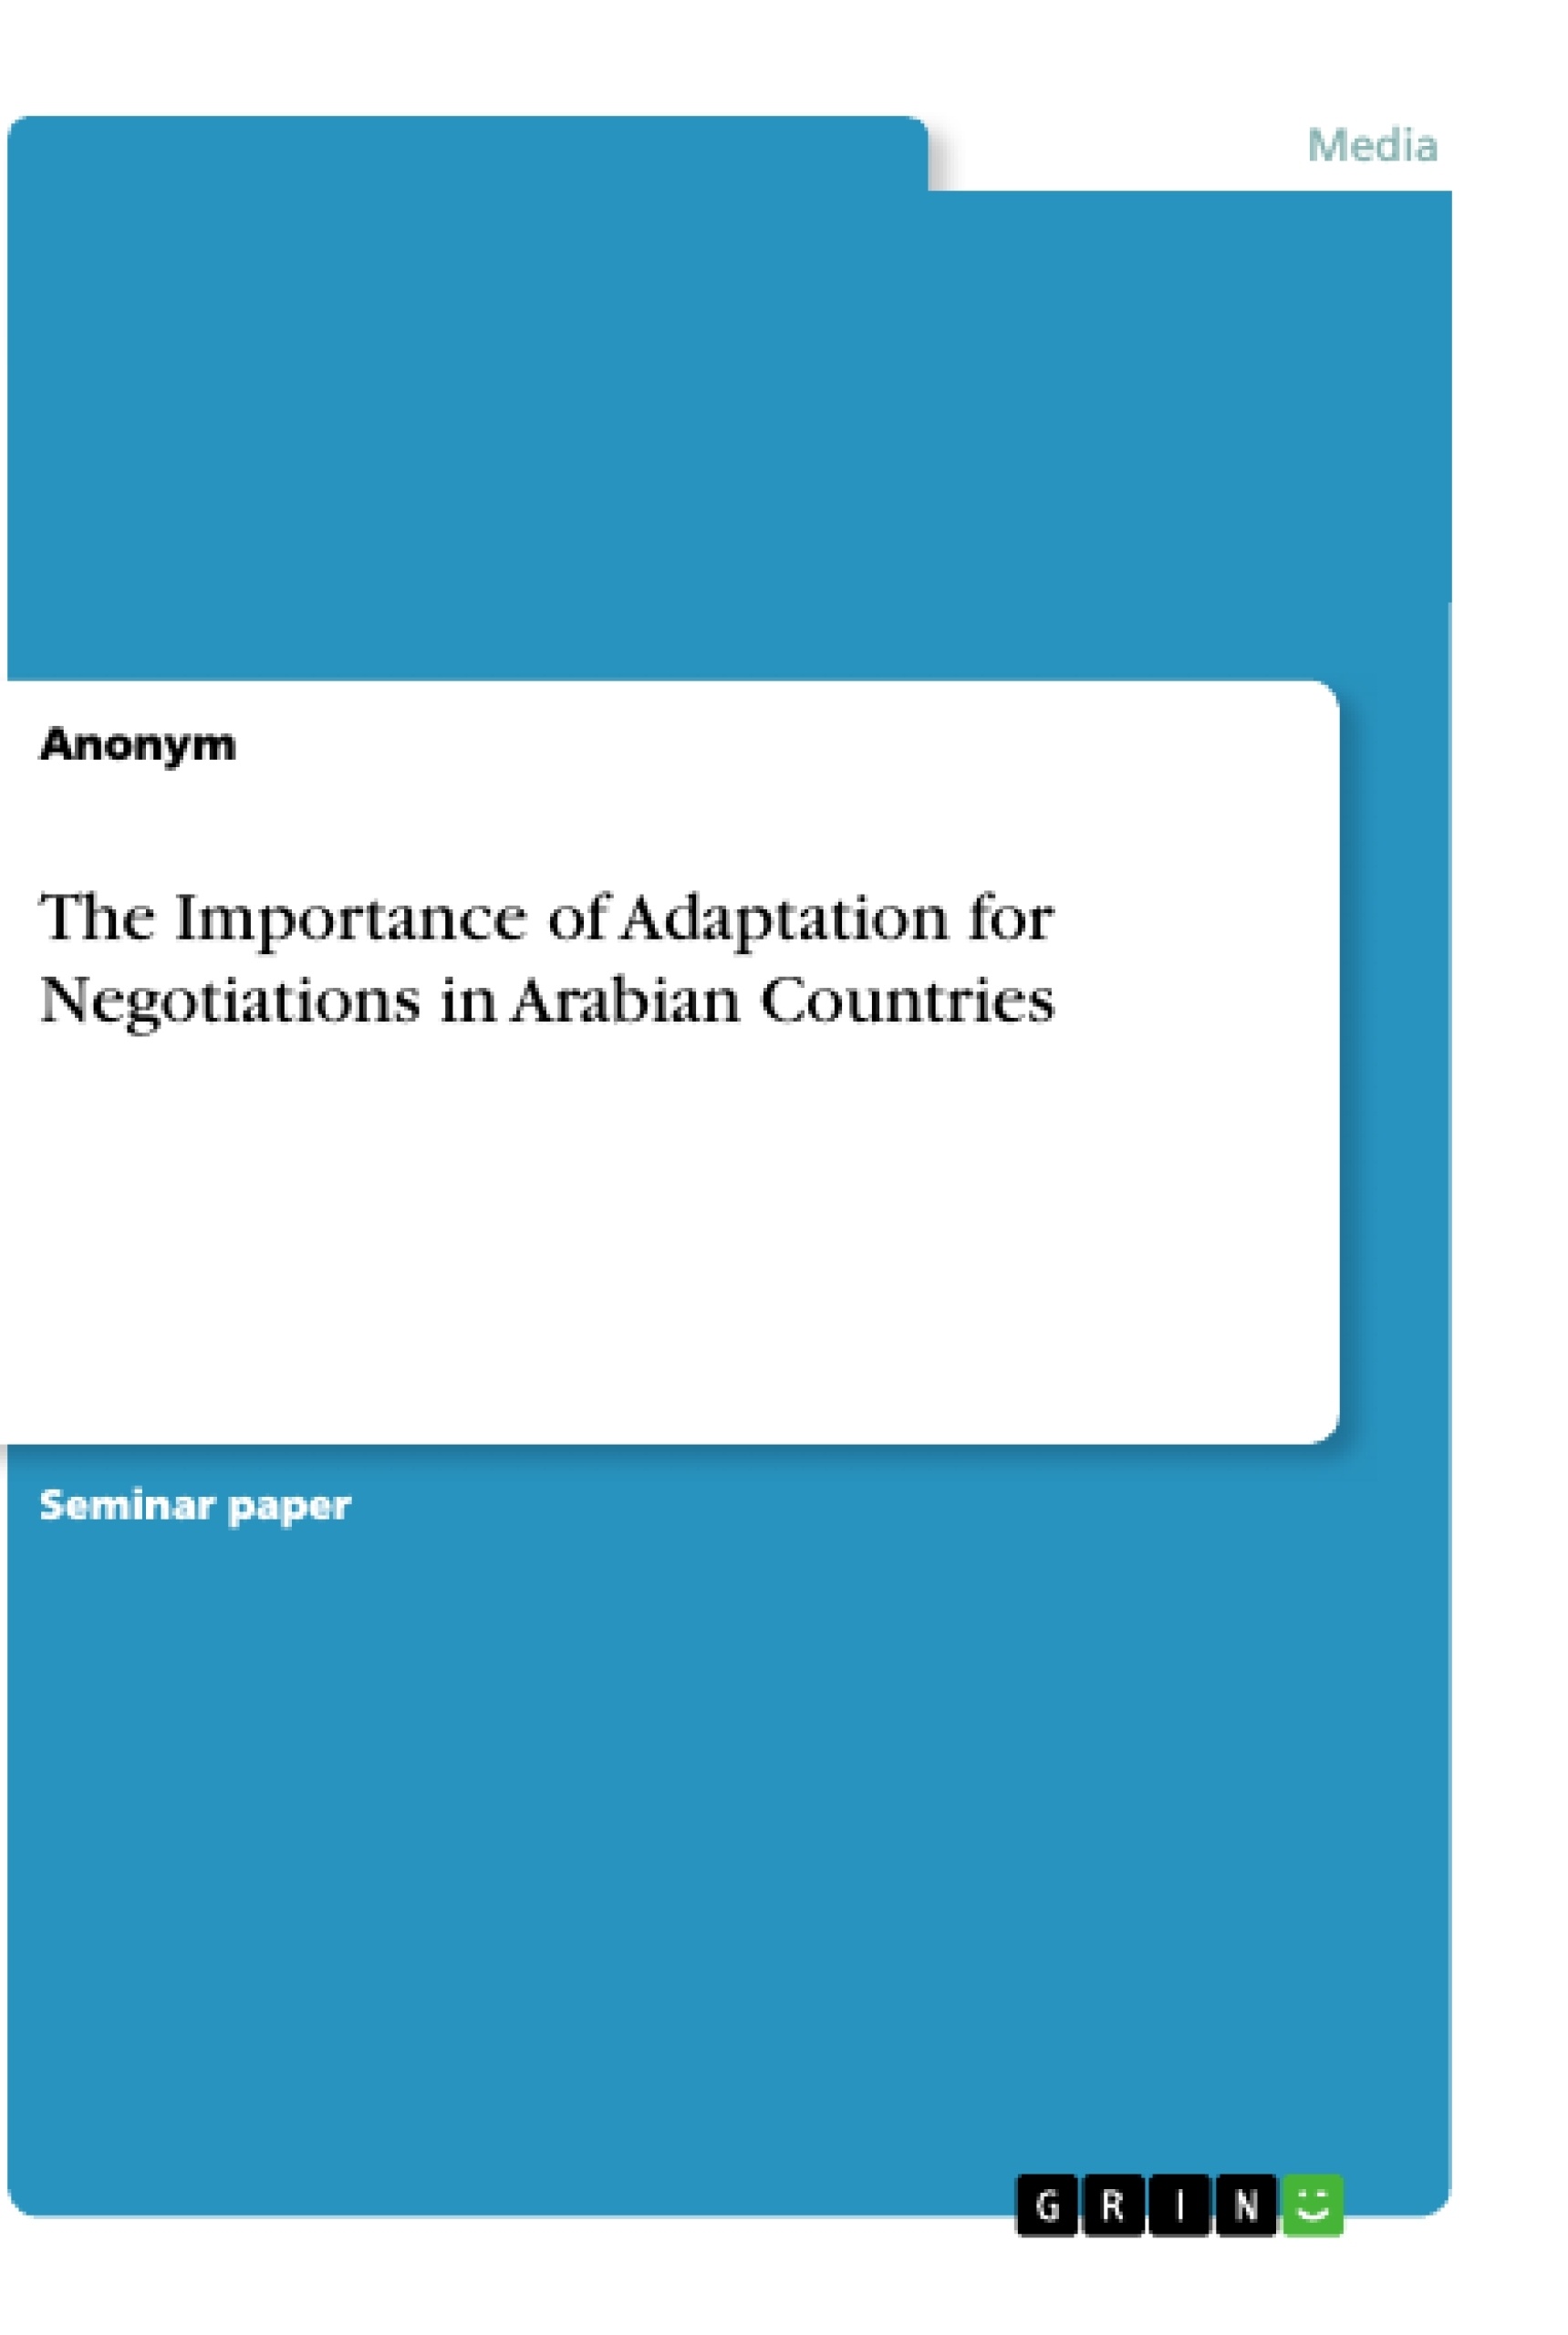 Titre: The Importance of Adaptation for Negotiations in Arabian Countries